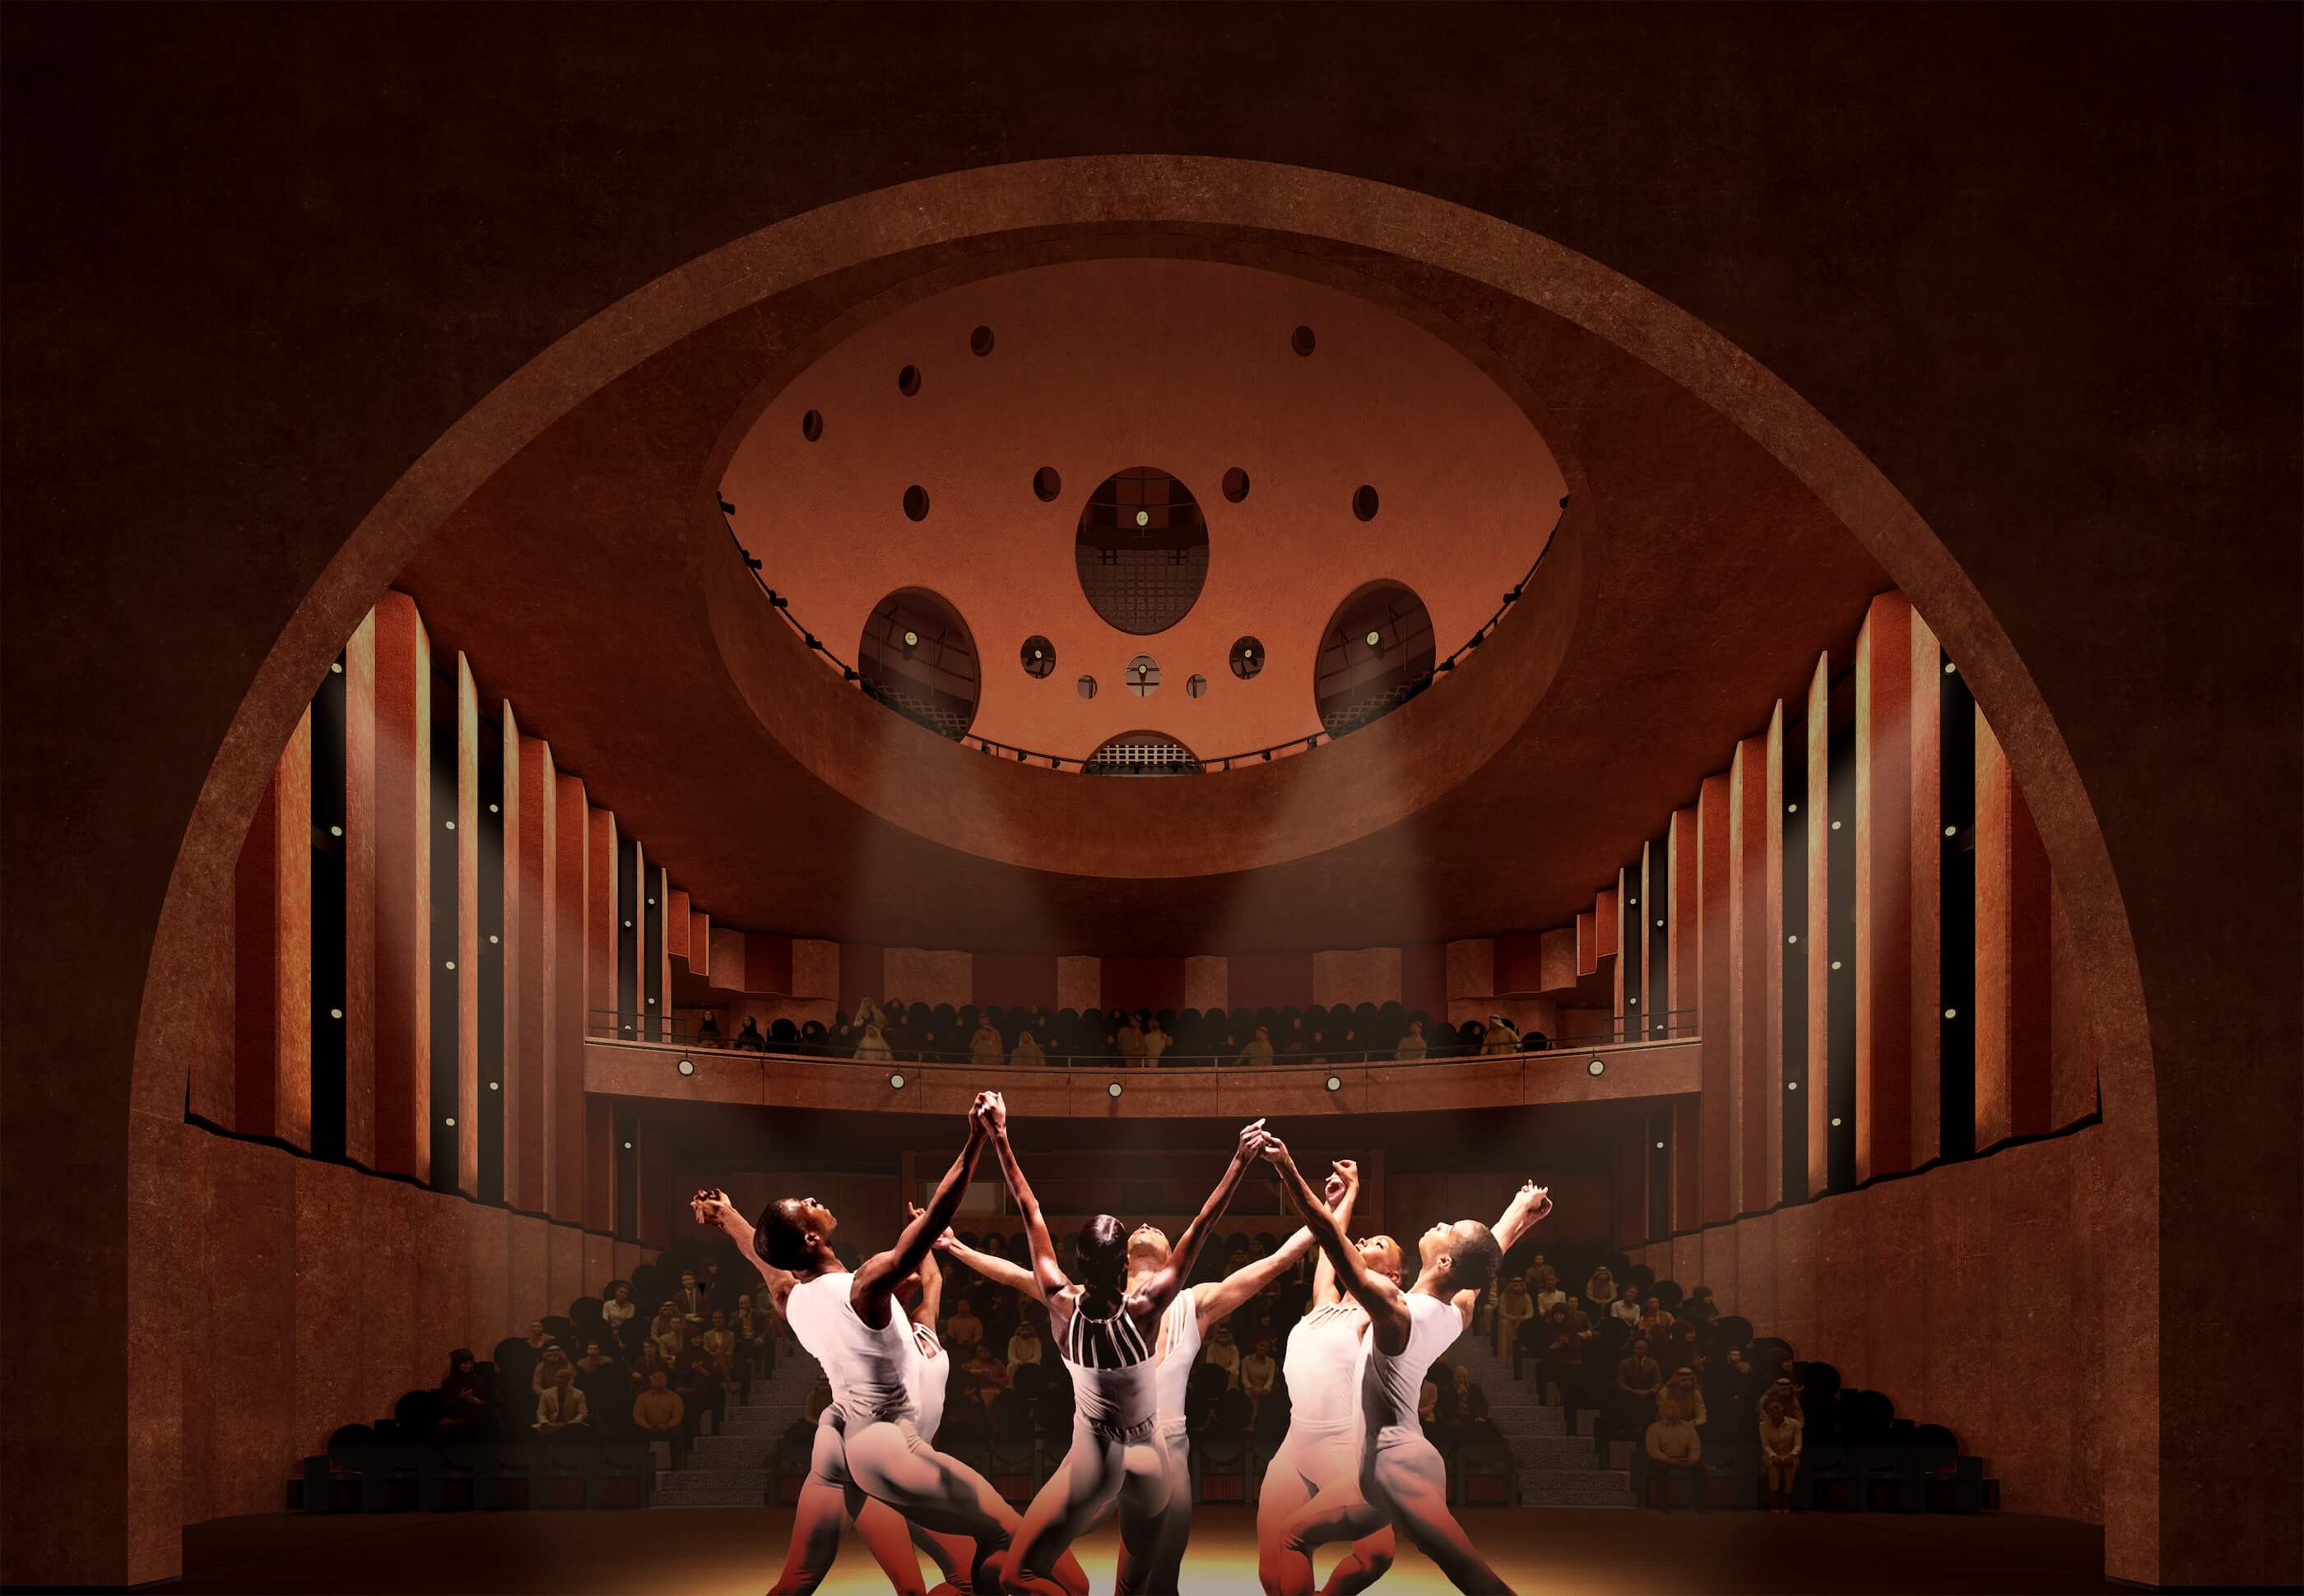 rendering of a dance performance taking place on a stage